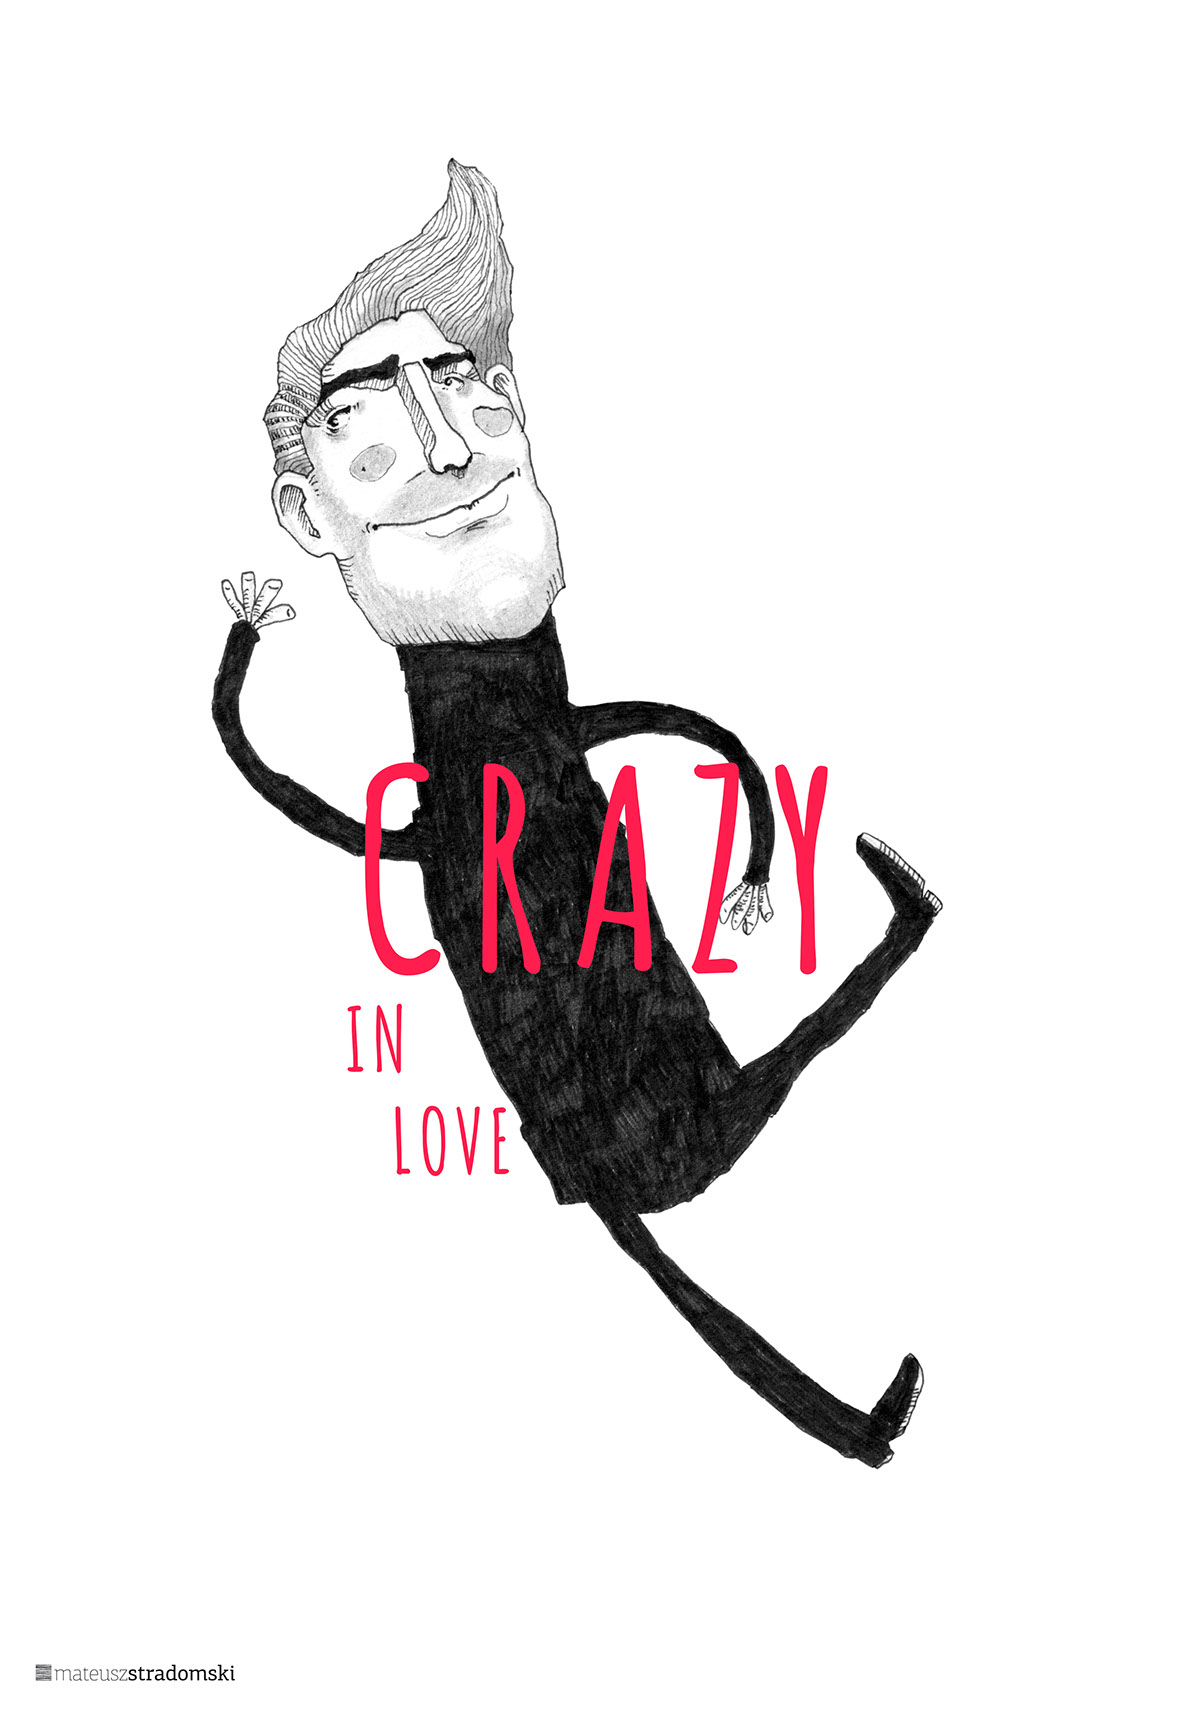 Crazy in love posters